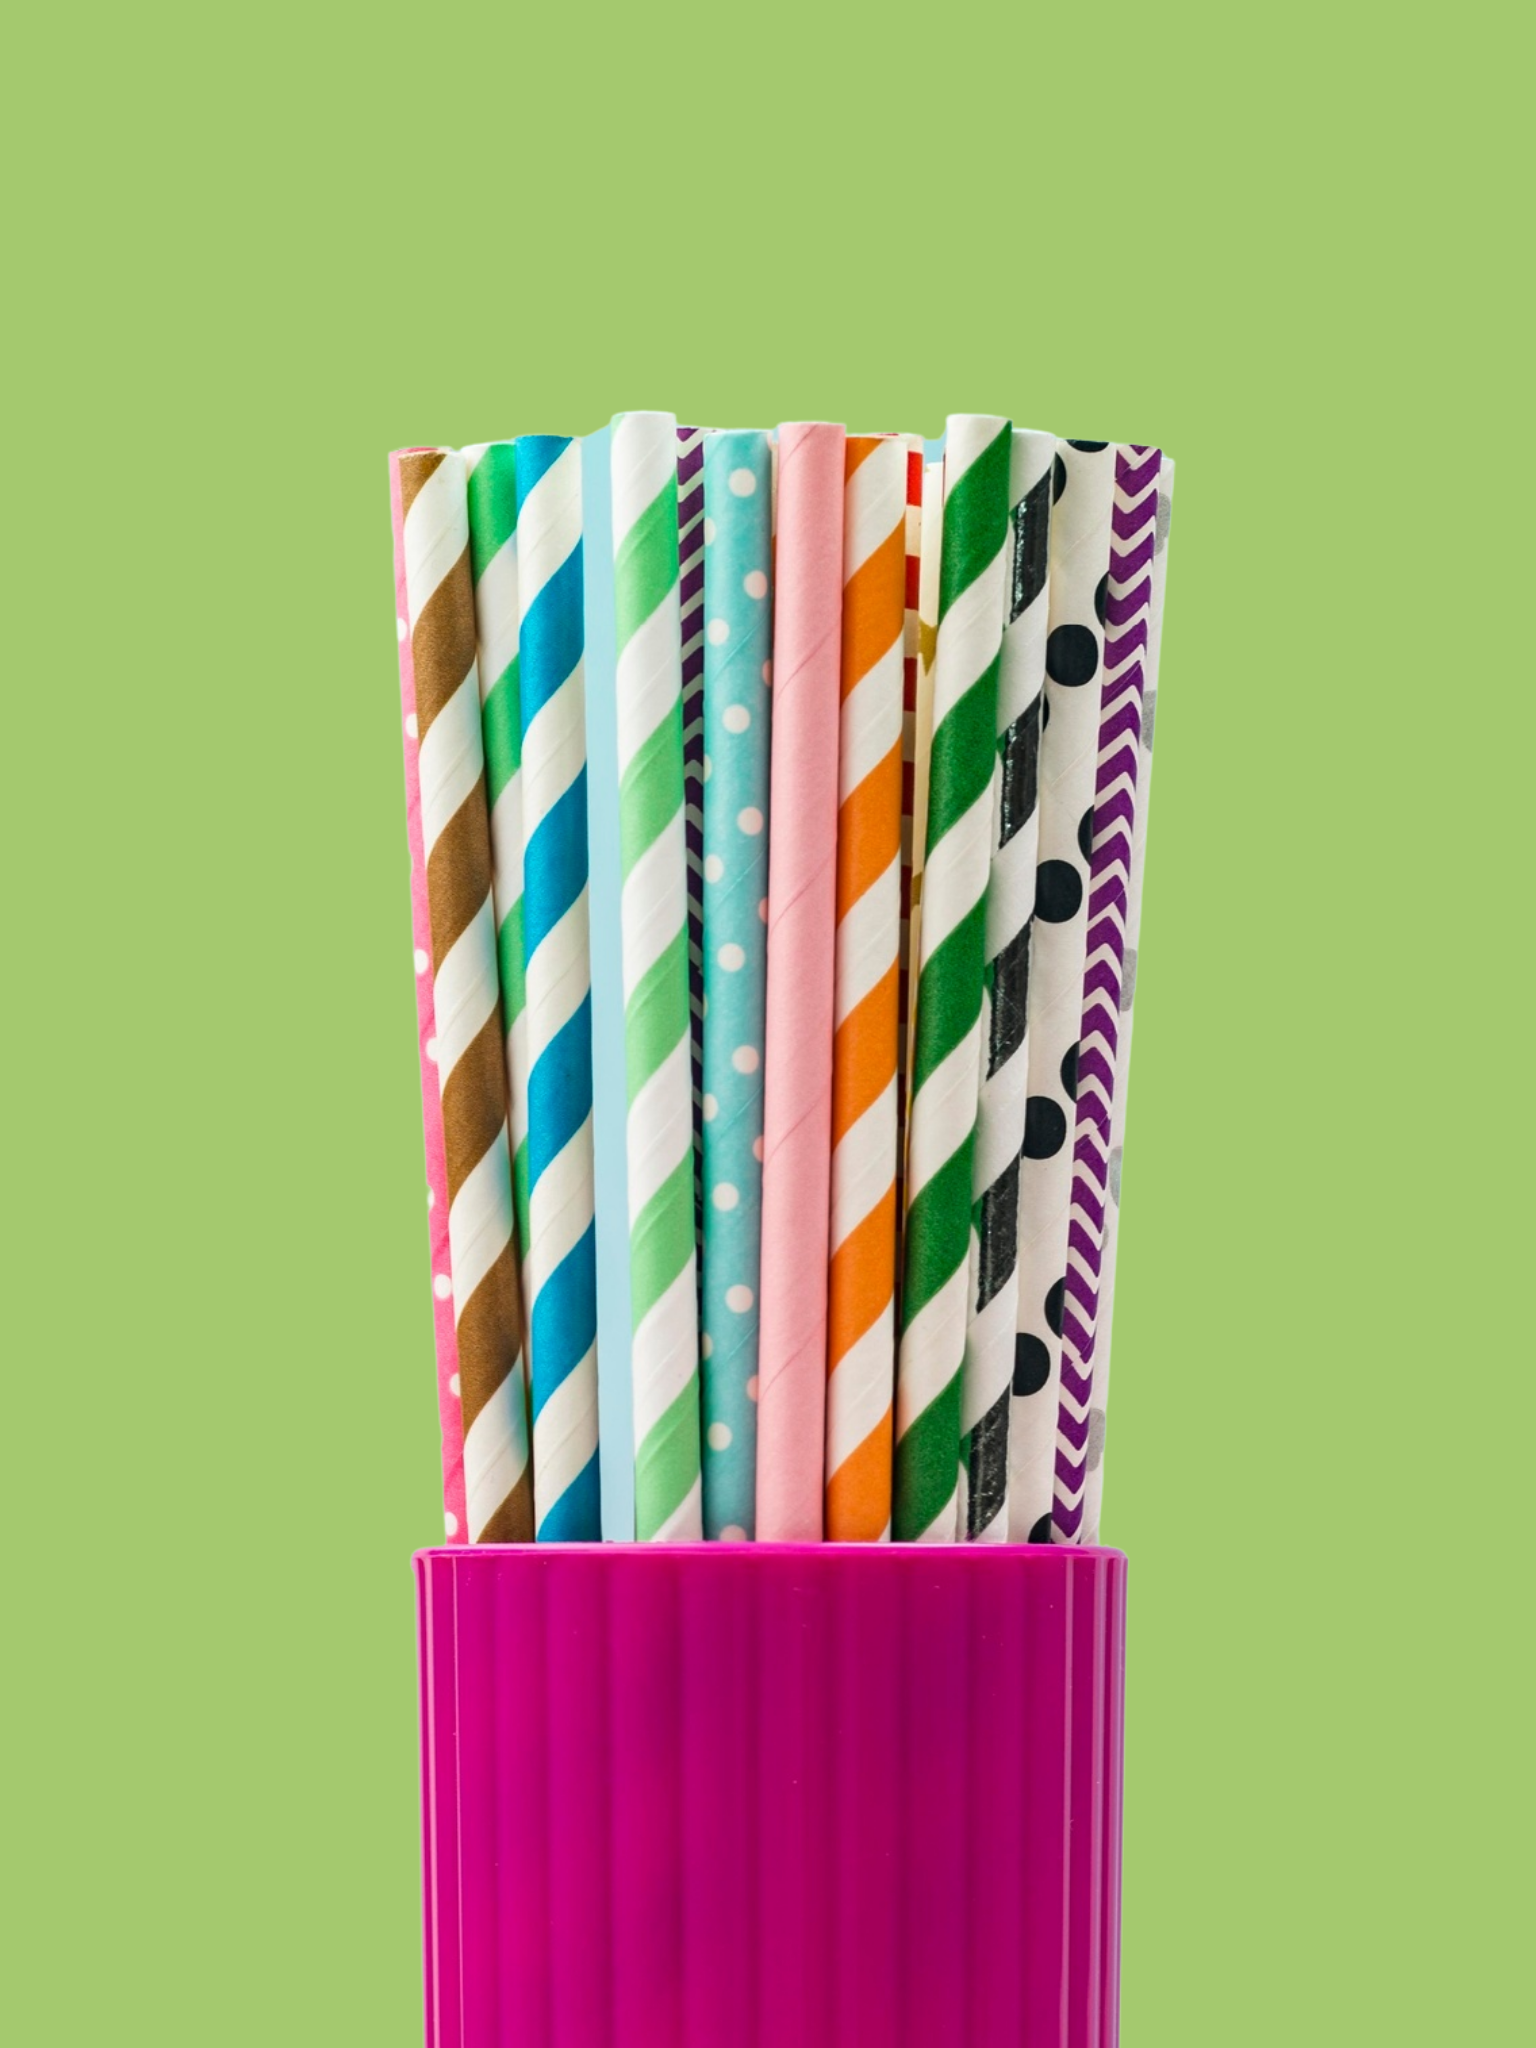 Colored printed paper straws